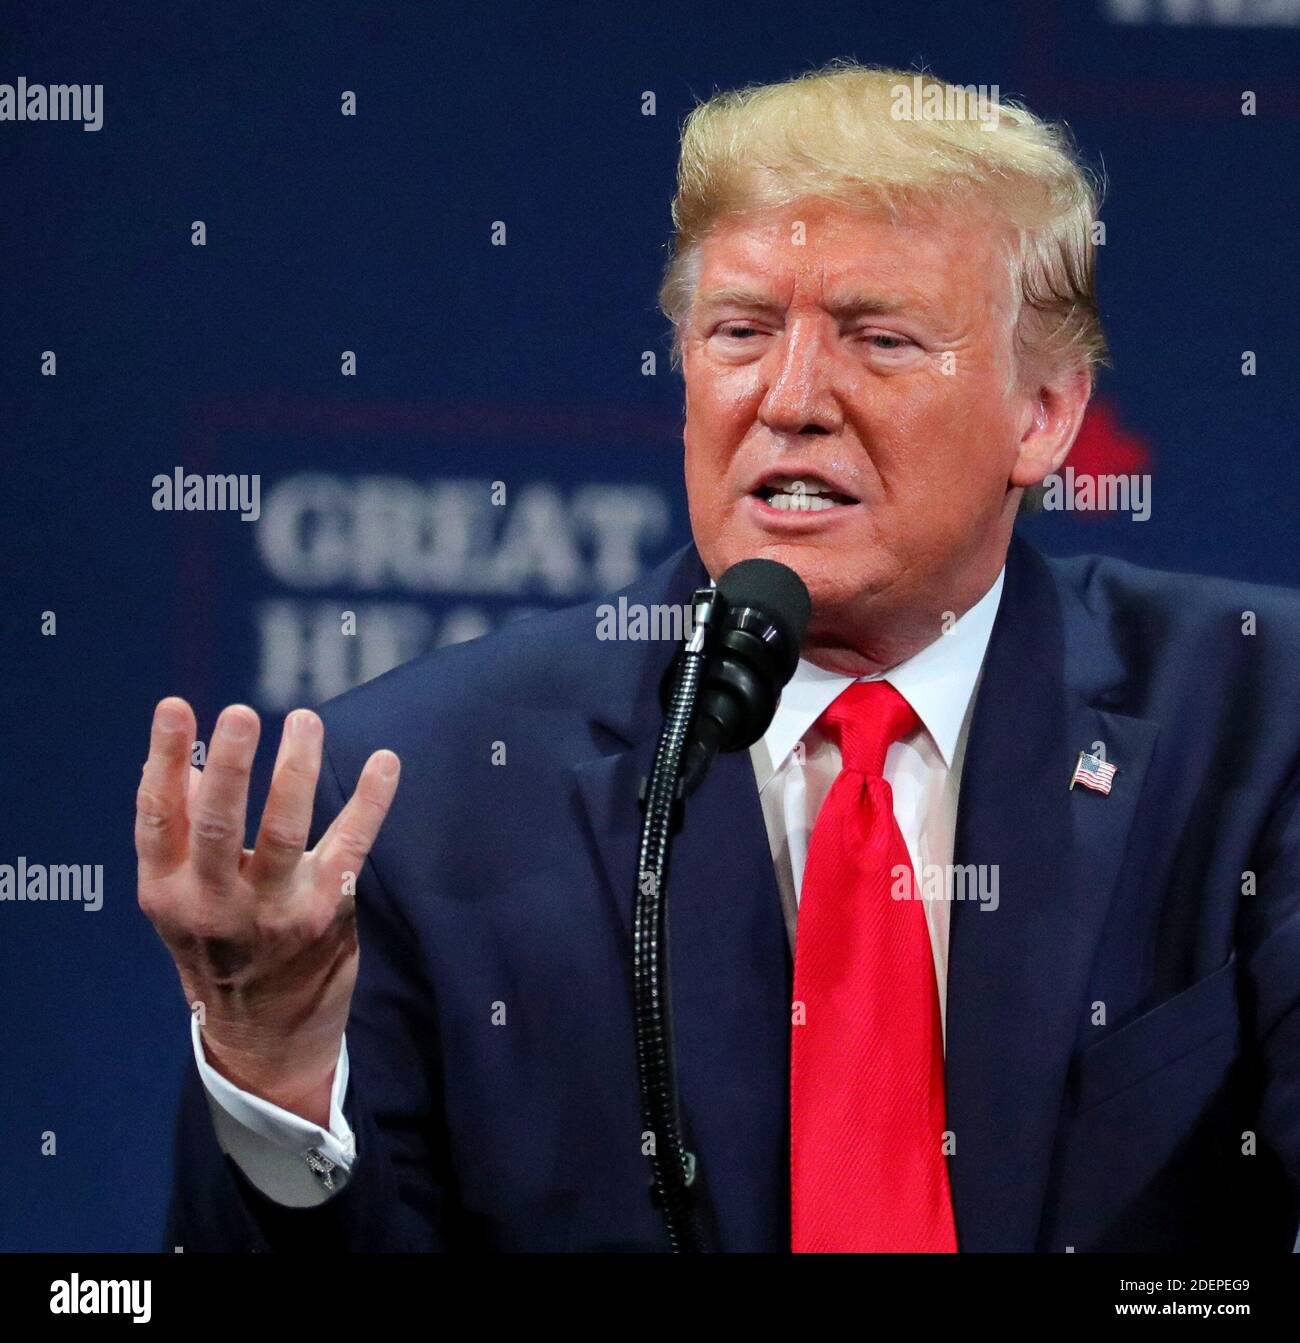 NO FILM, NO VIDEO, NO TV, NO DOCUMENTARY - President Donald Trump delivers remarks during his appearance at the Sharon L. Morris Performing Arts Center in The Villages, Fla., Thursday, October 3, 2019. Photo by Joe Burbank/Orlando Sentinel/TNS/ABACAPRESS.COM Stock Photo